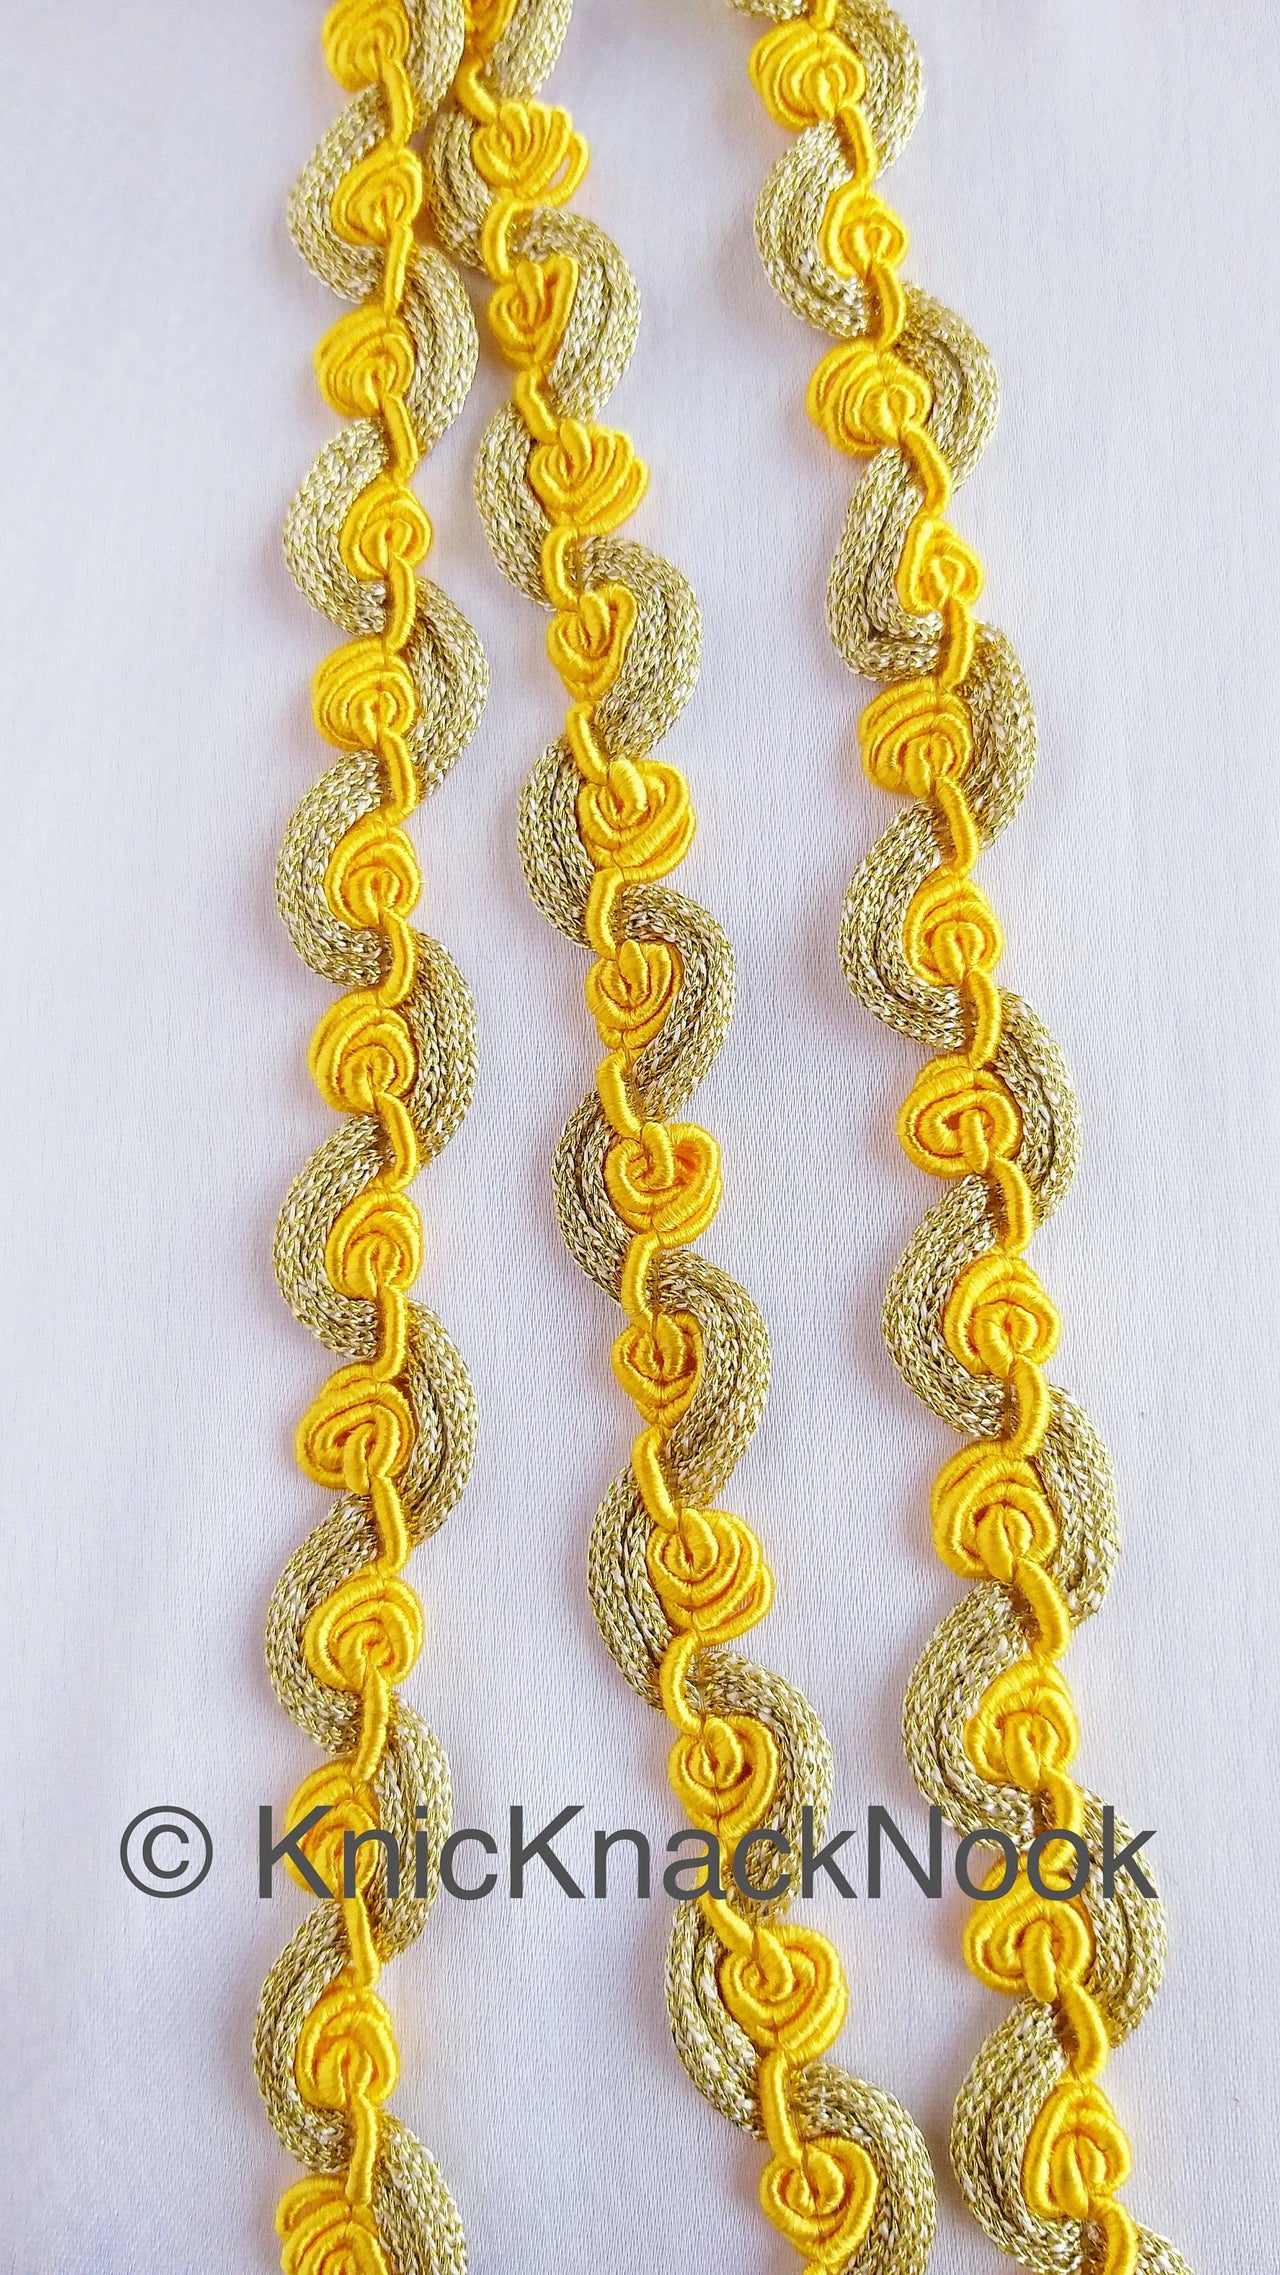 Shimmering Gold And Blue / Yellow / Coral Thread Floral Lace Trim,  Rose Trim, Flower Roses